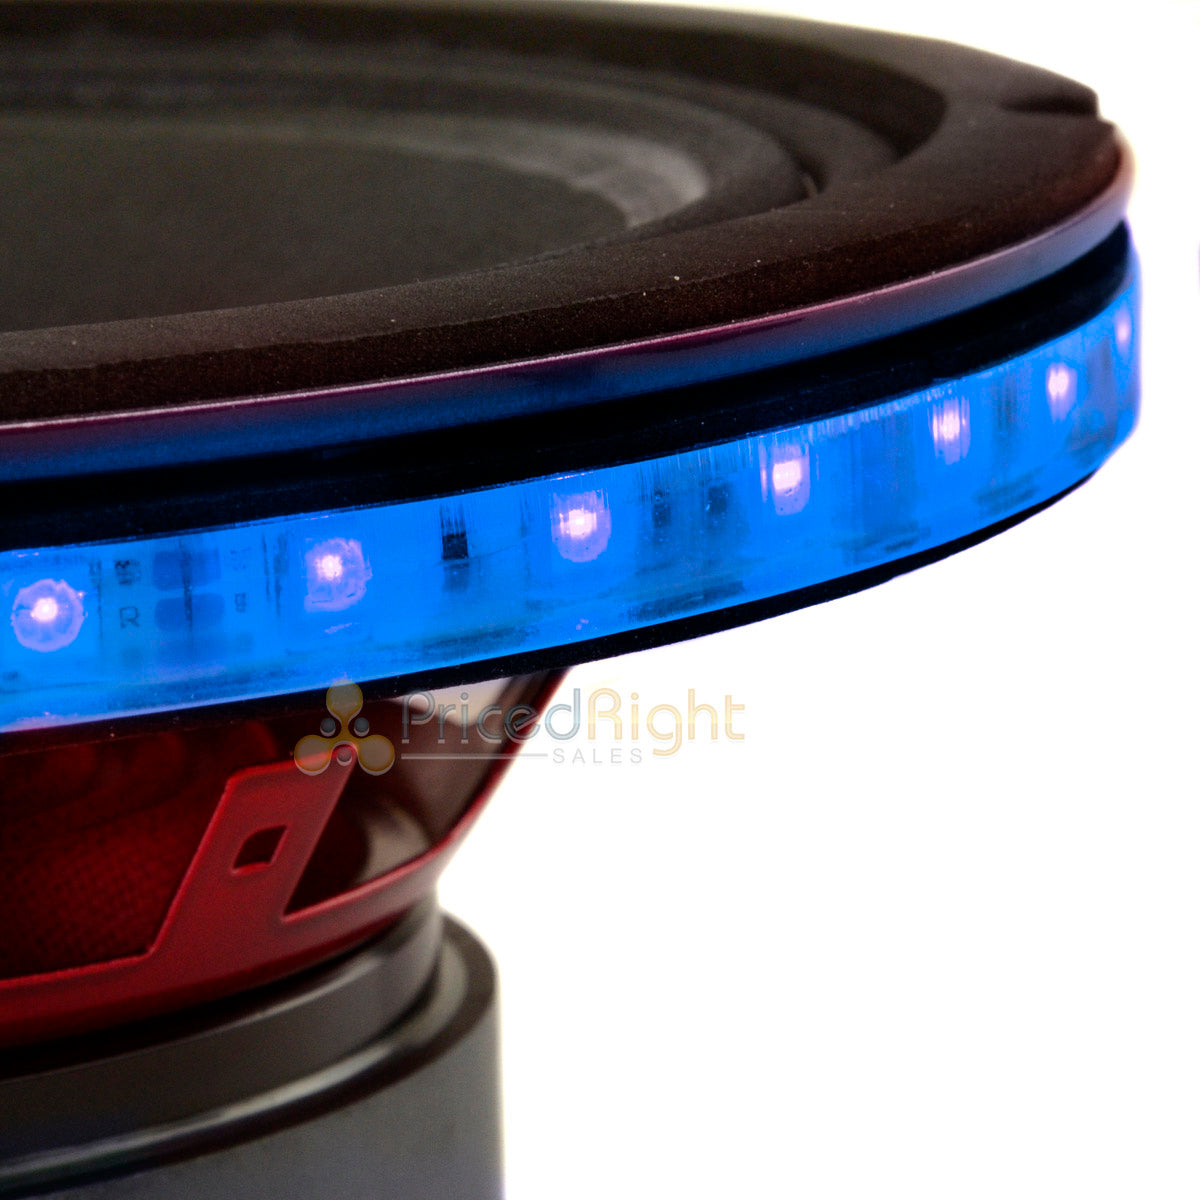 10" Waterproof RGB LED Speaker Ring 1/2" Spacer DS18 LRING10 Accent Single